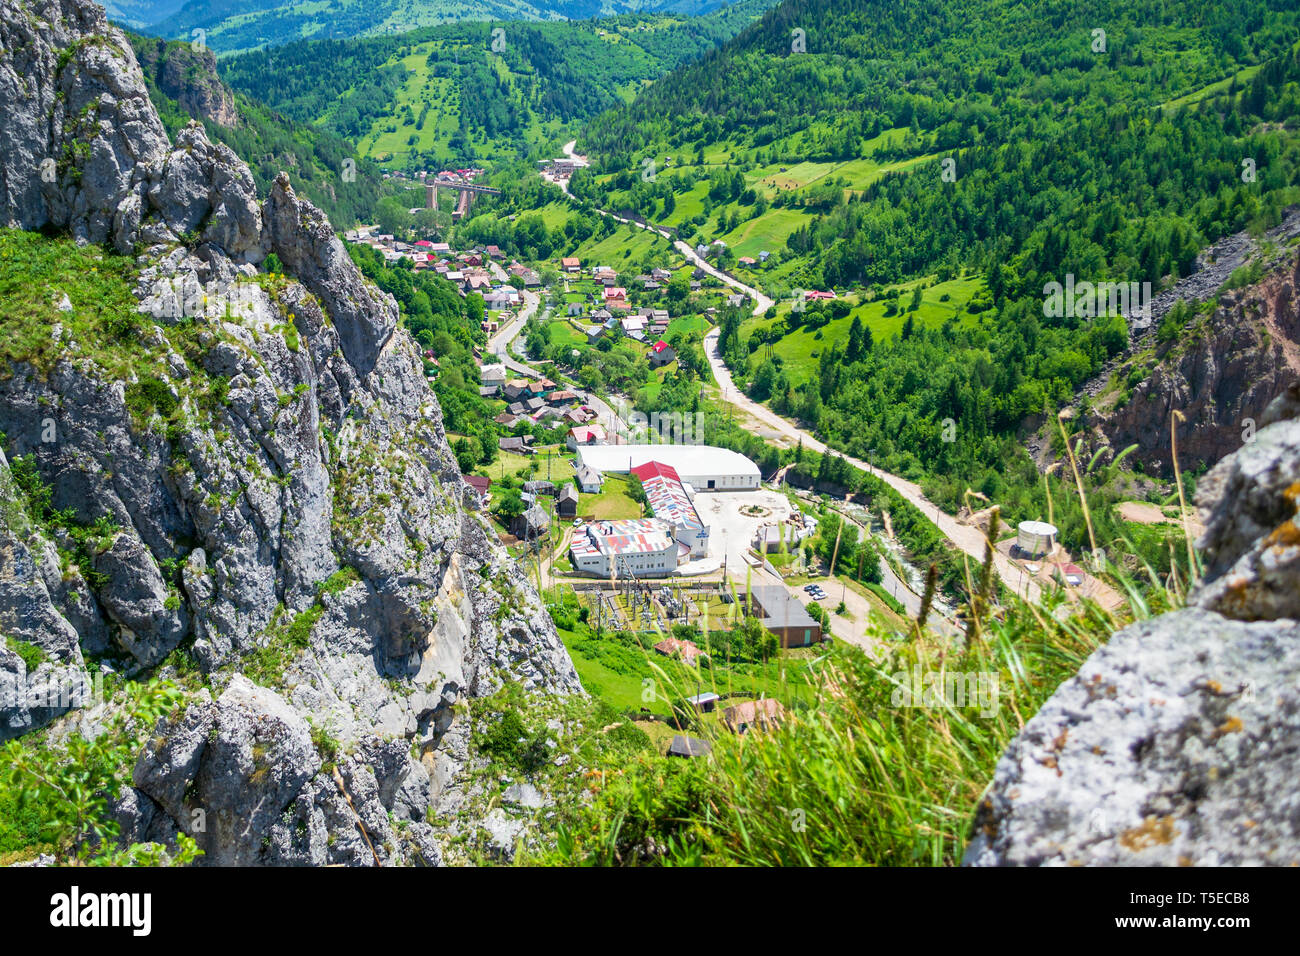 Panoramic views from via ferrata 'Astragalus', a popular tourist attraction in Bicaz Gorge (Cheile Bicazului), Neamt county, Romania. Vivid bright nat Stock Photo